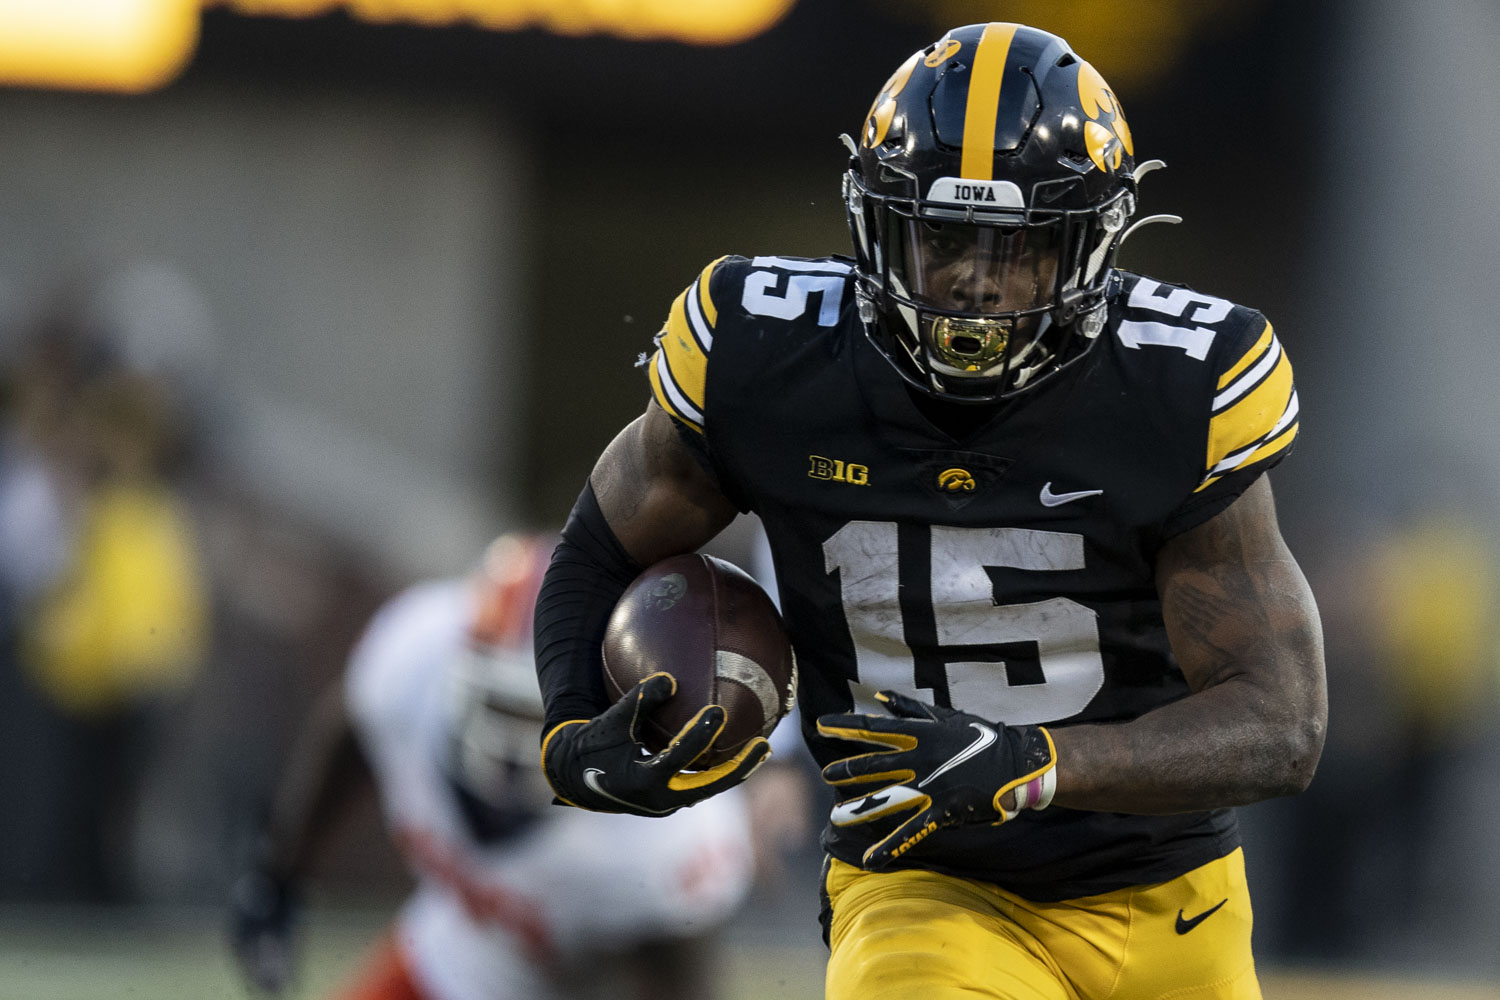 Tyler Goodson skipped Iowa's Bowl Game so he wouldn't get hurt before the Draft